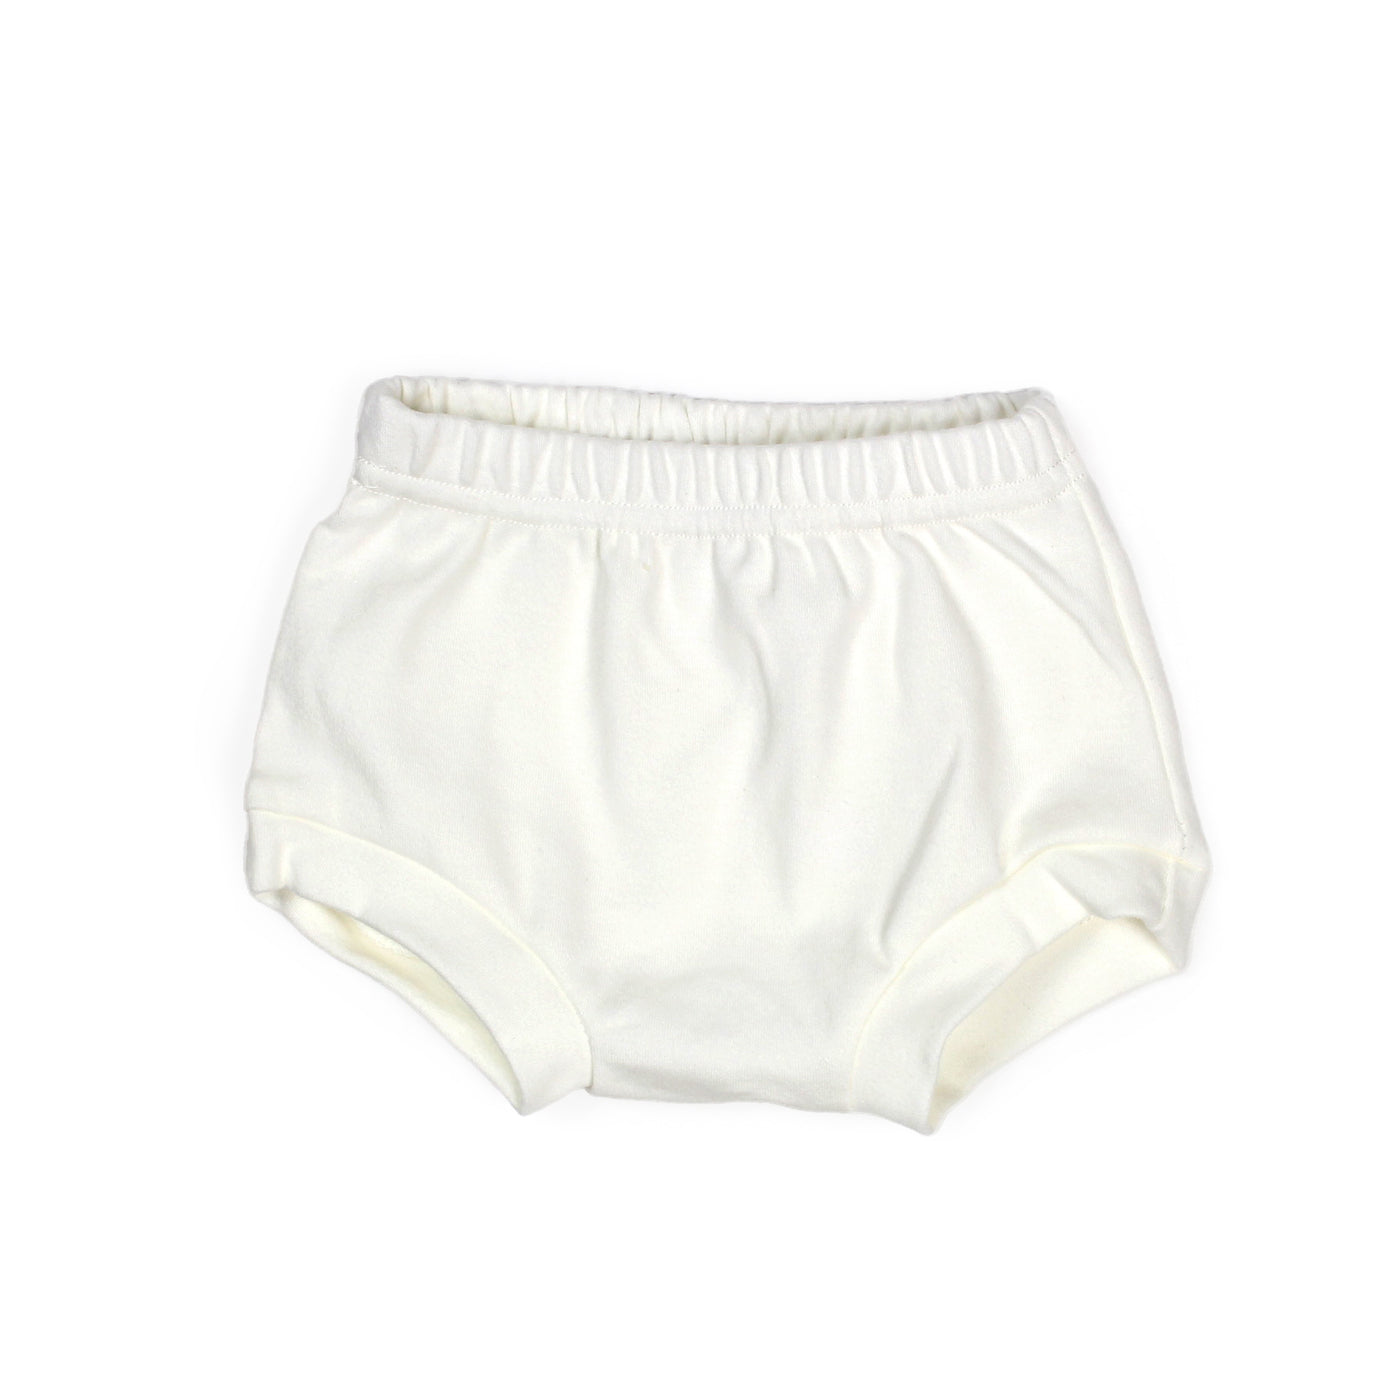 AguKids bloomers size 6-9 months